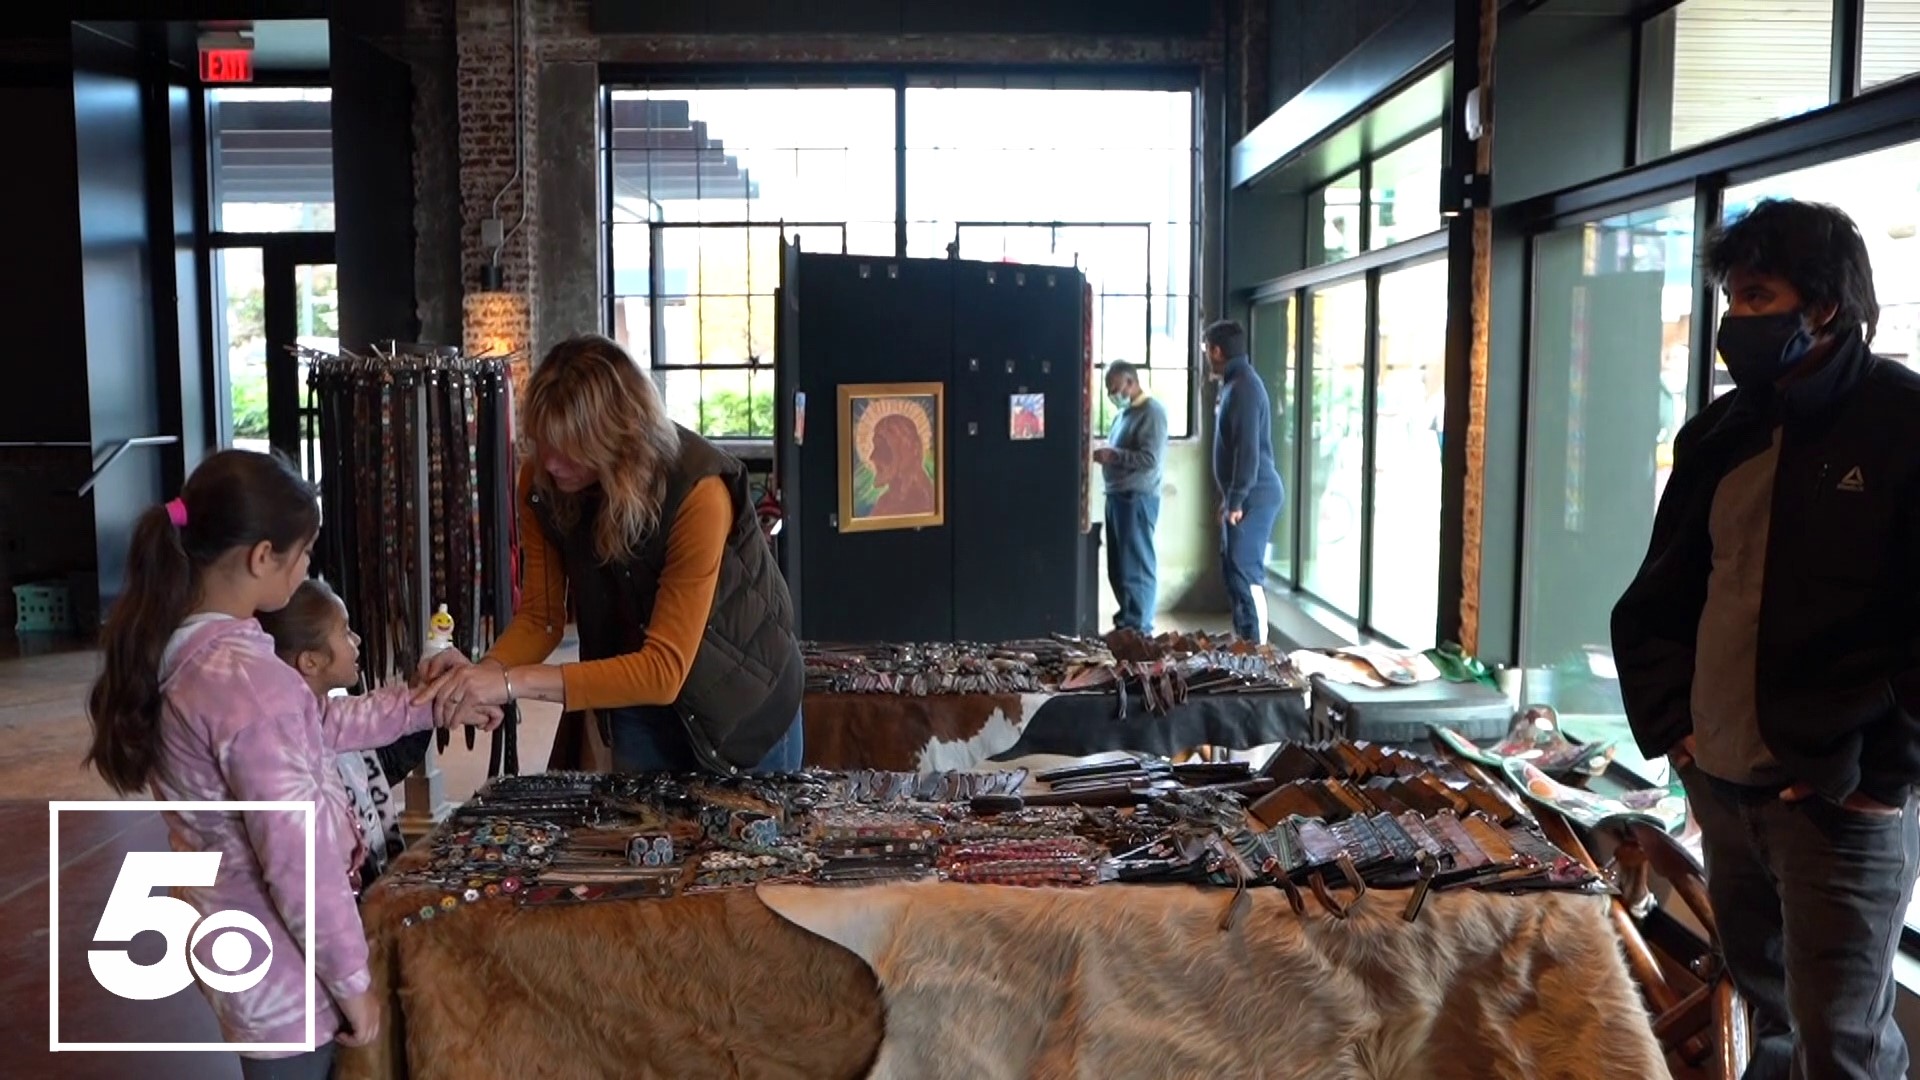 Downtown Bentonville event venue Record will soon host a community market on select Saturdays through March. 5NEWS has the scoop on what you can expect to see.